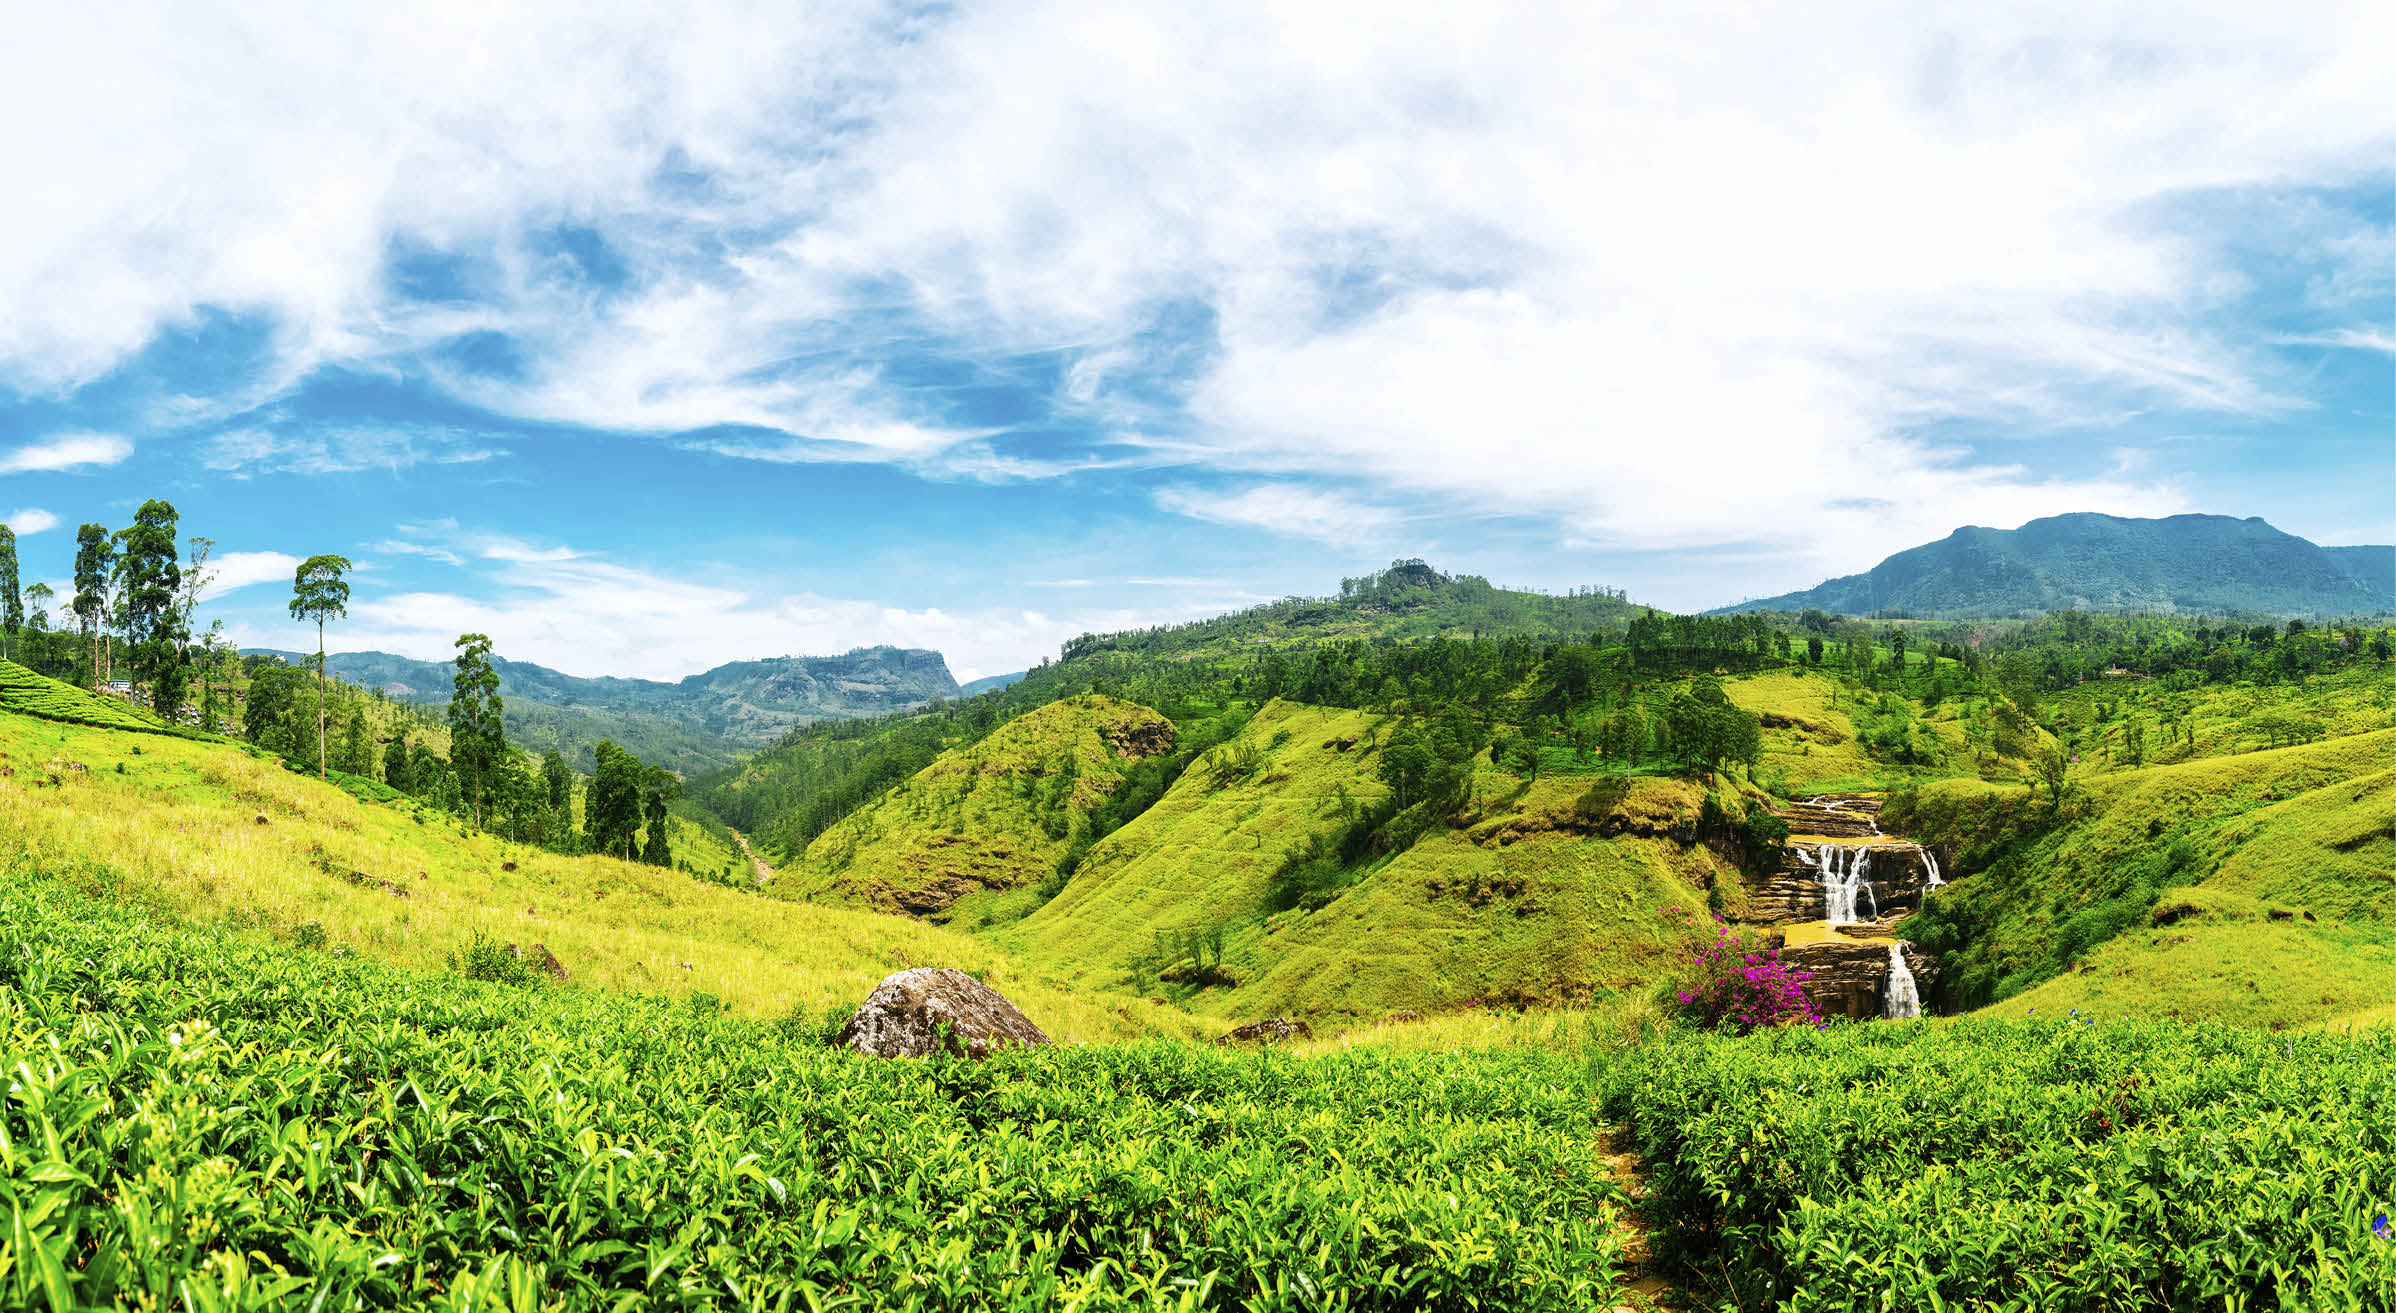 Waterfall valley near Nuwara Eliya, Sri Lanka. Tea plantations on the foreground. Waterfall, mountains and blue sky with clouds on the background. Shot taken with Canon 5D mk III. High resolution panorama.